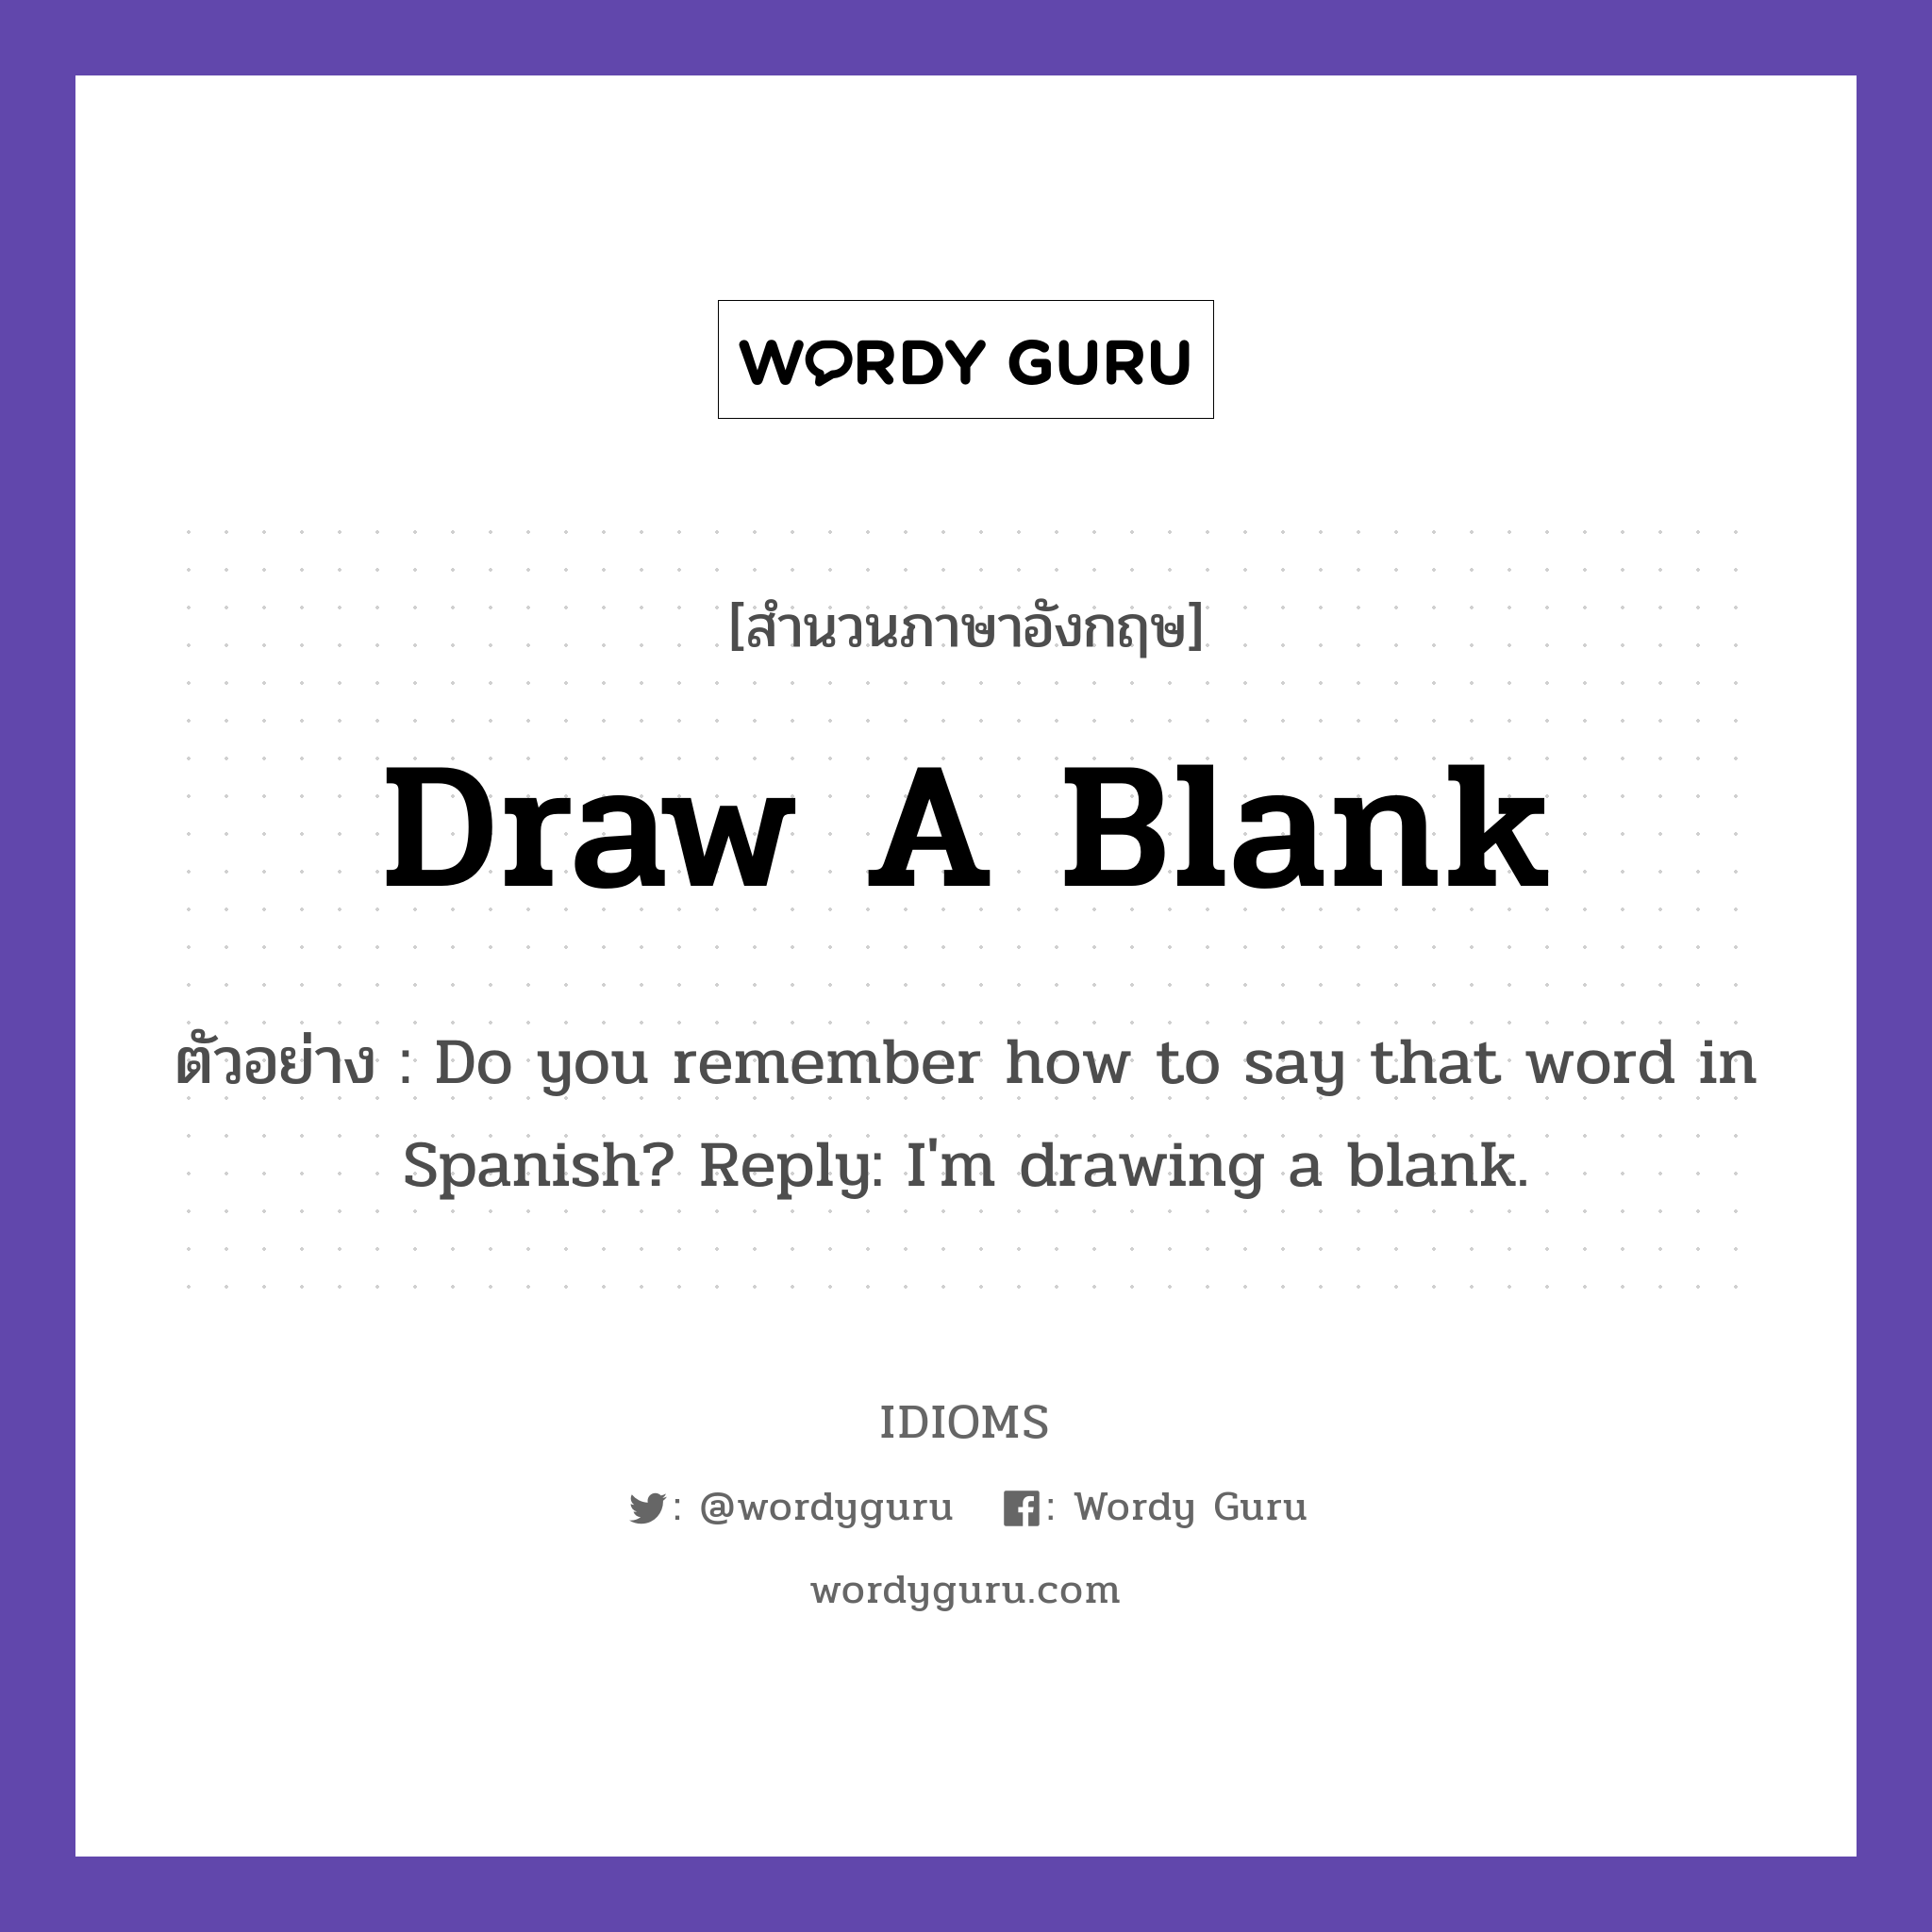 Draw A Blank แปลว่า?, สำนวนภาษาอังกฤษ Draw A Blank ตัวอย่าง Do you remember how to say that word in Spanish? Reply: I'm drawing a blank.